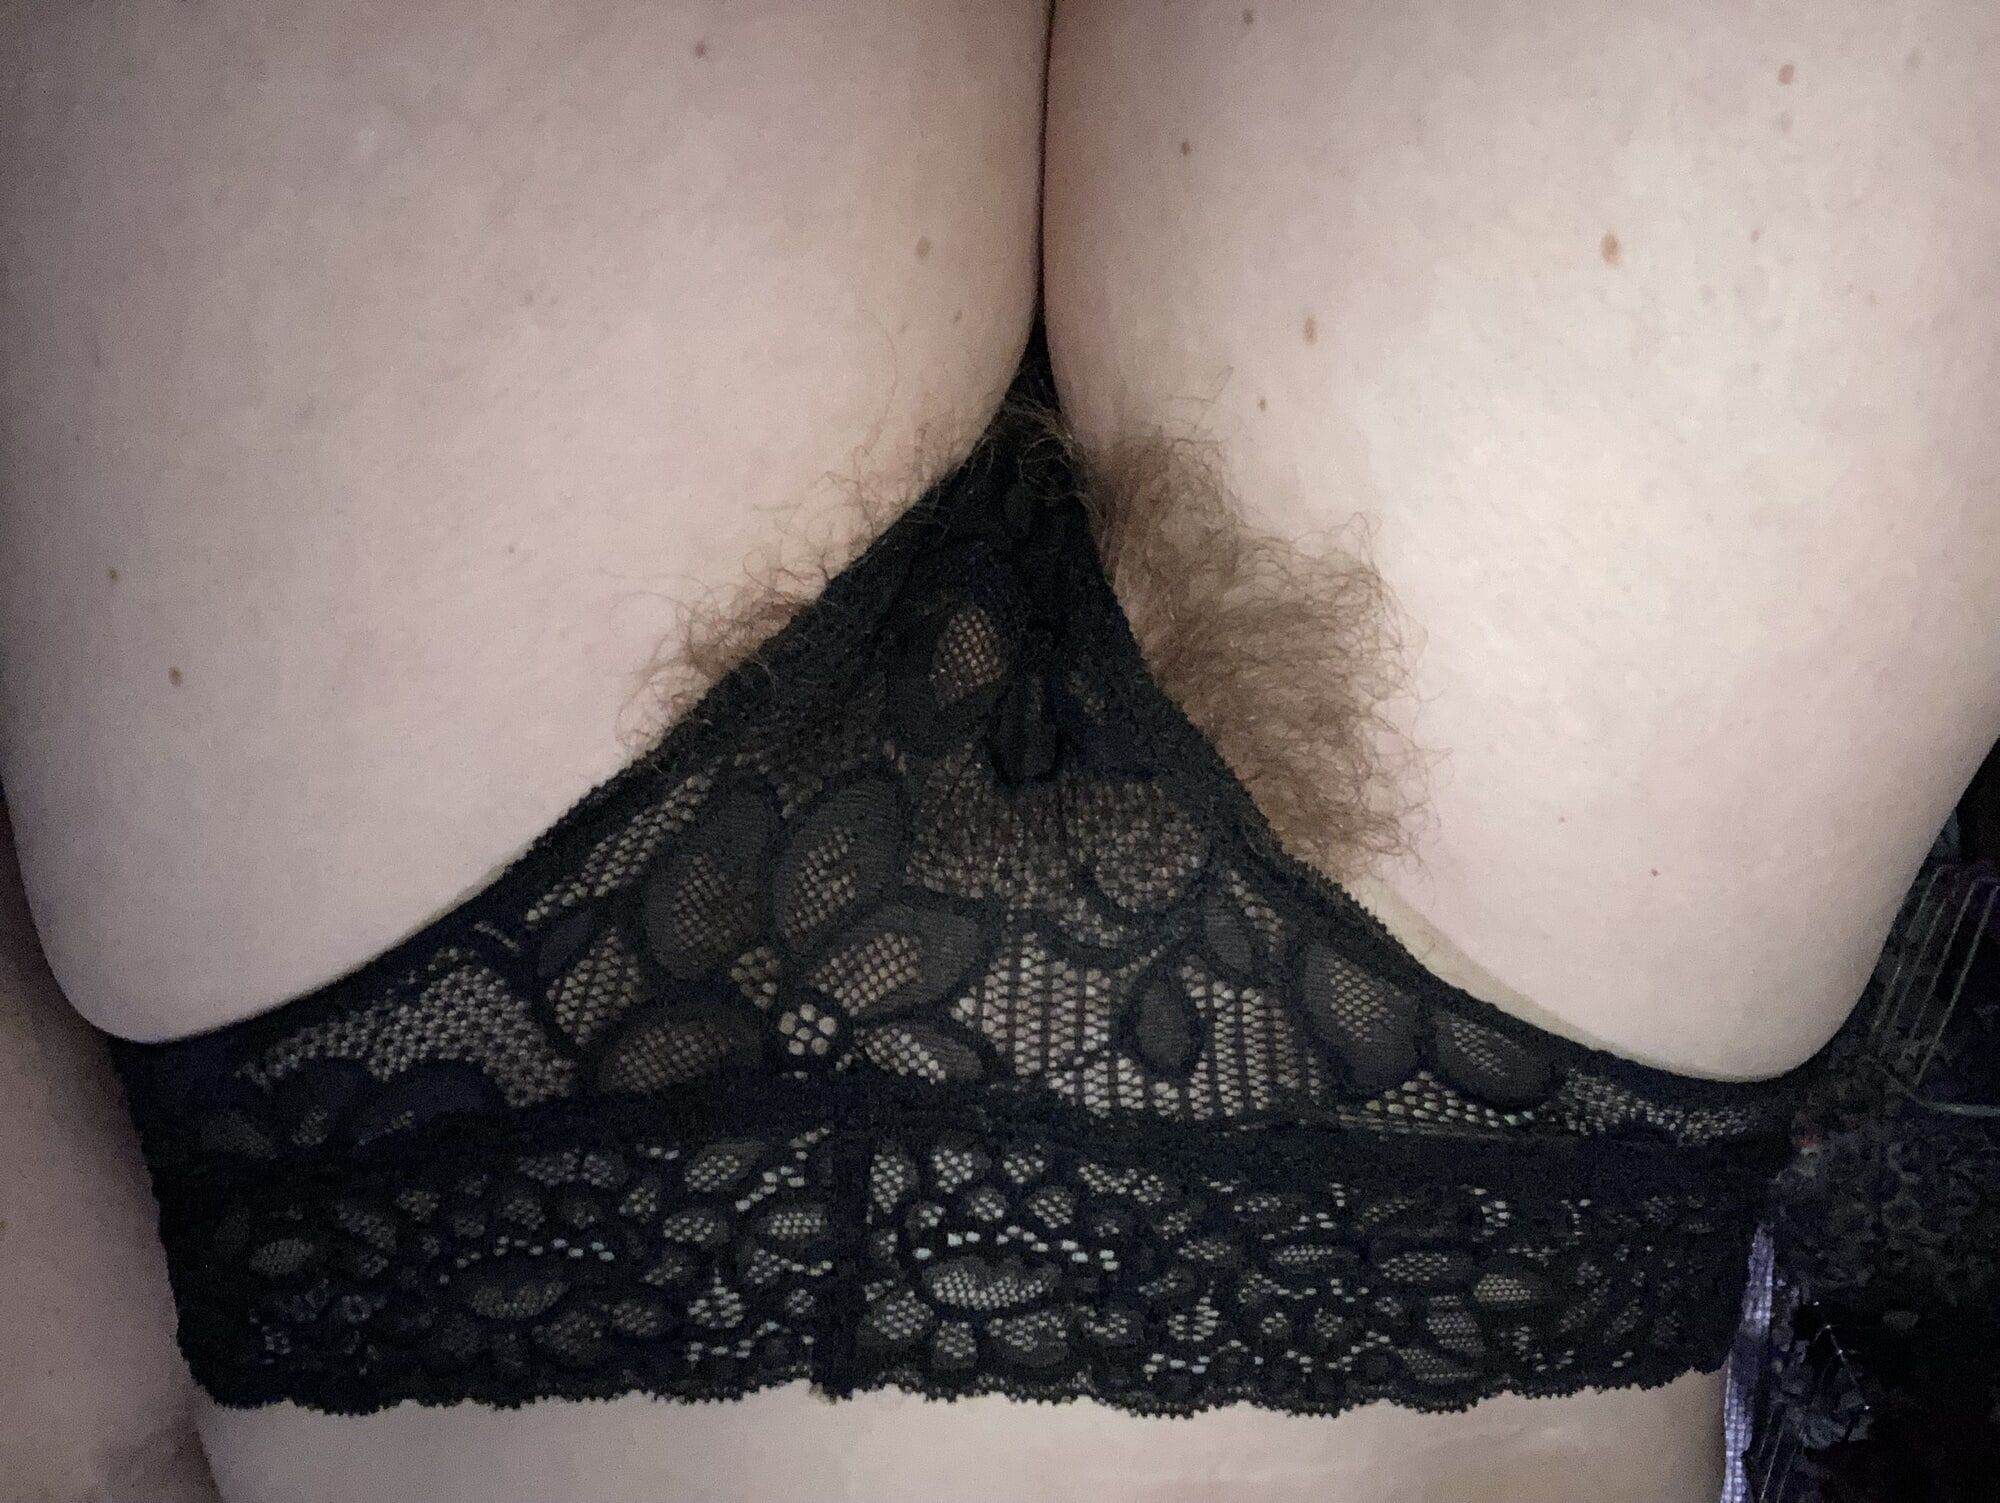 Lacy lingerie with whiskers 